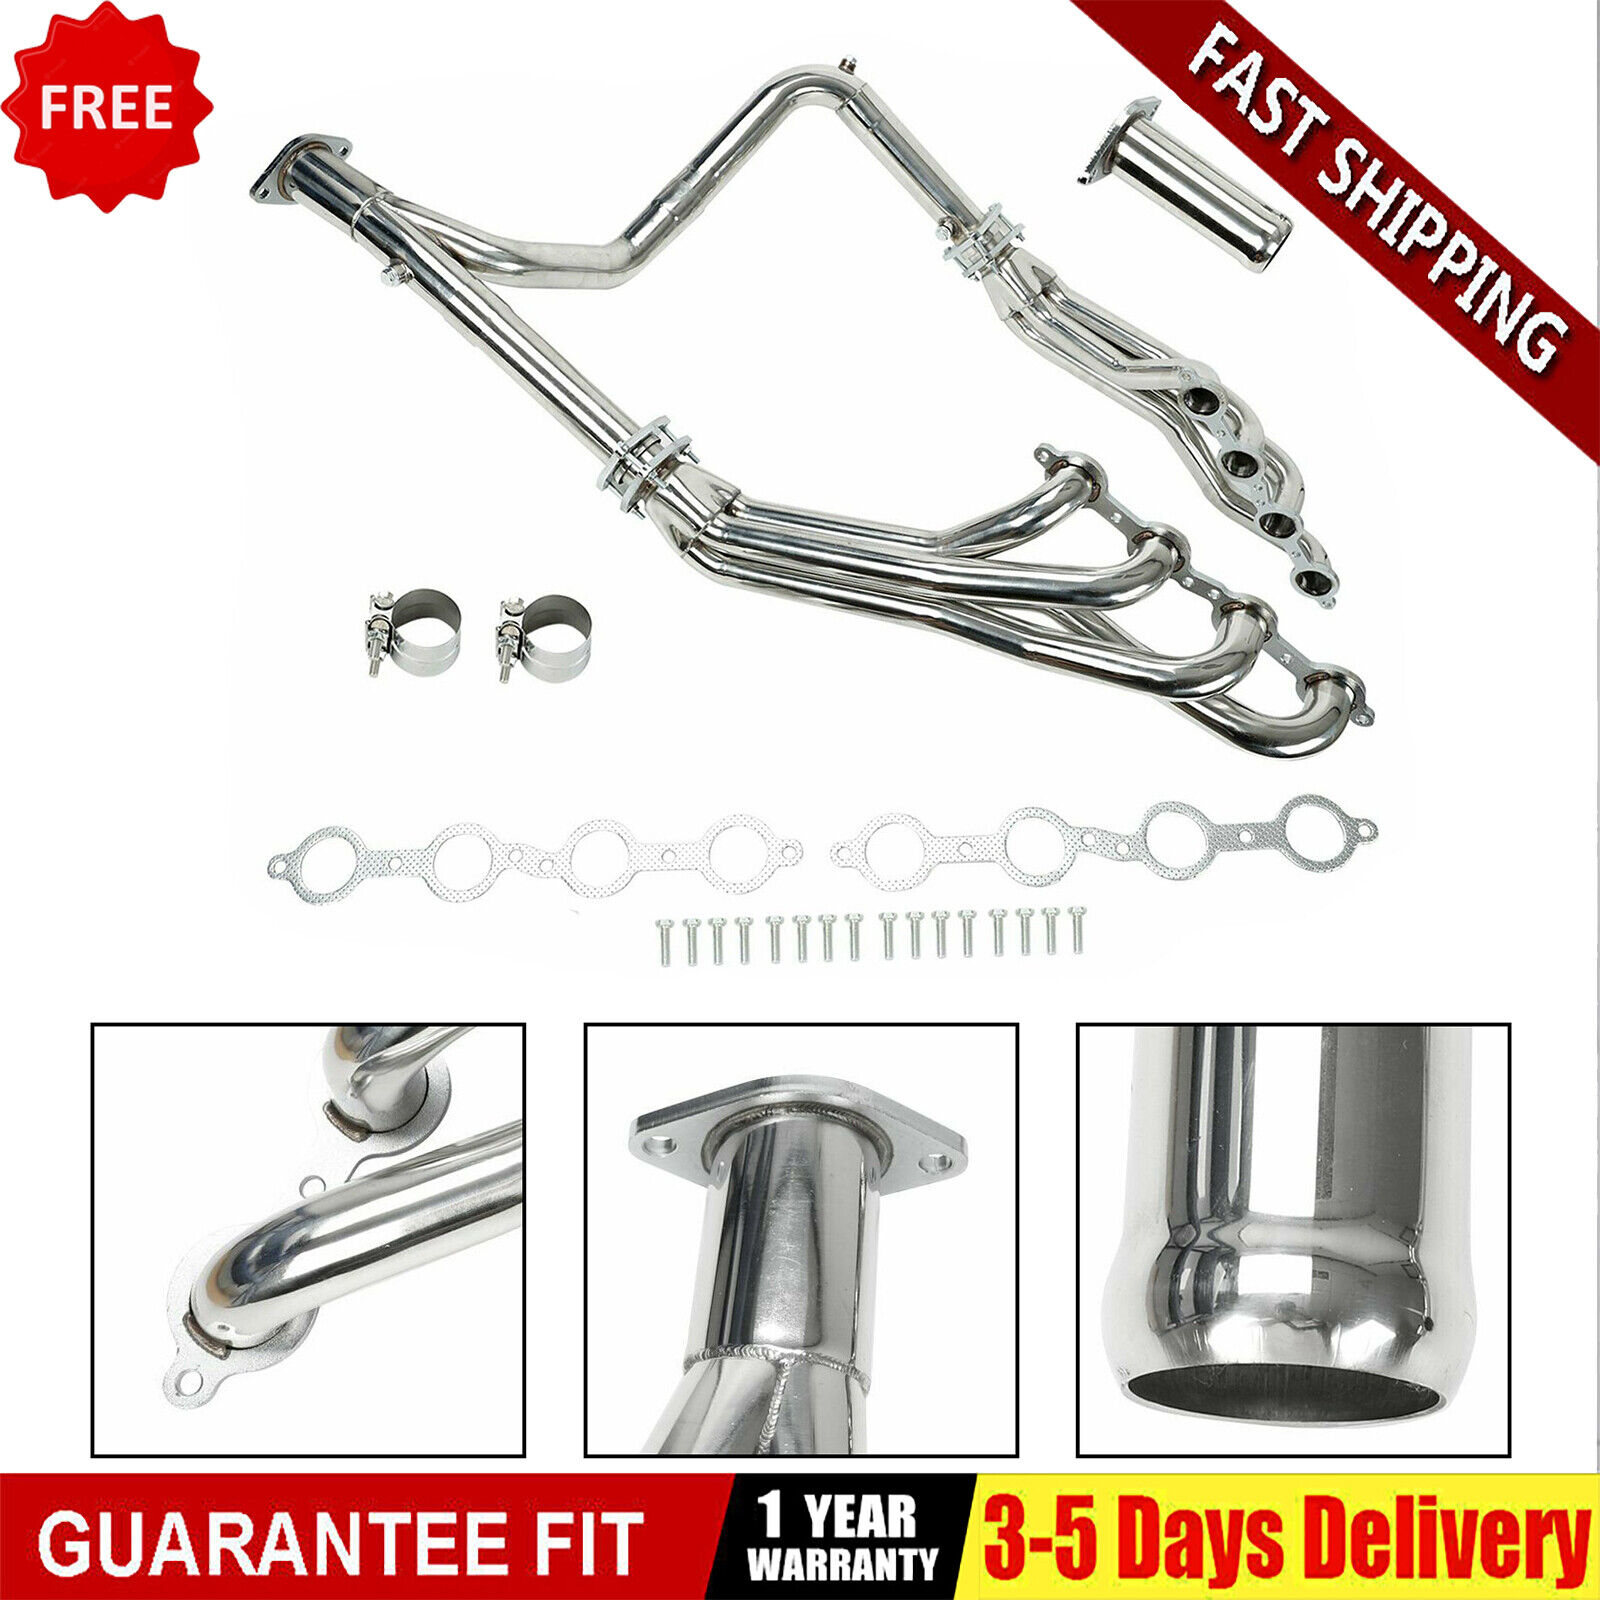 Stainless Exhaust Manifold Headers fits for Chevy GMC 2007-2014 4.8L 5.3L 6.0L